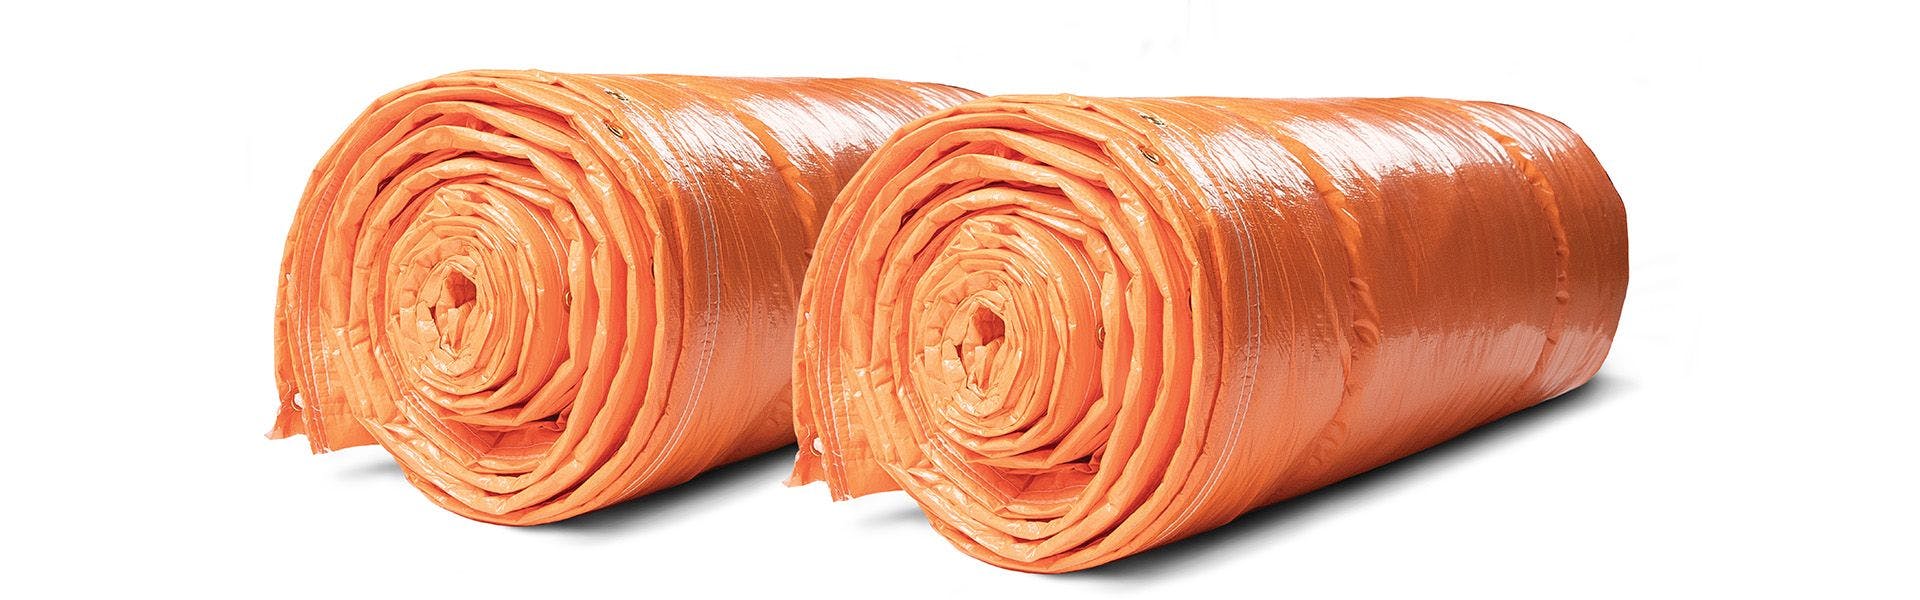 article image insulated blankets tarp two rolls material